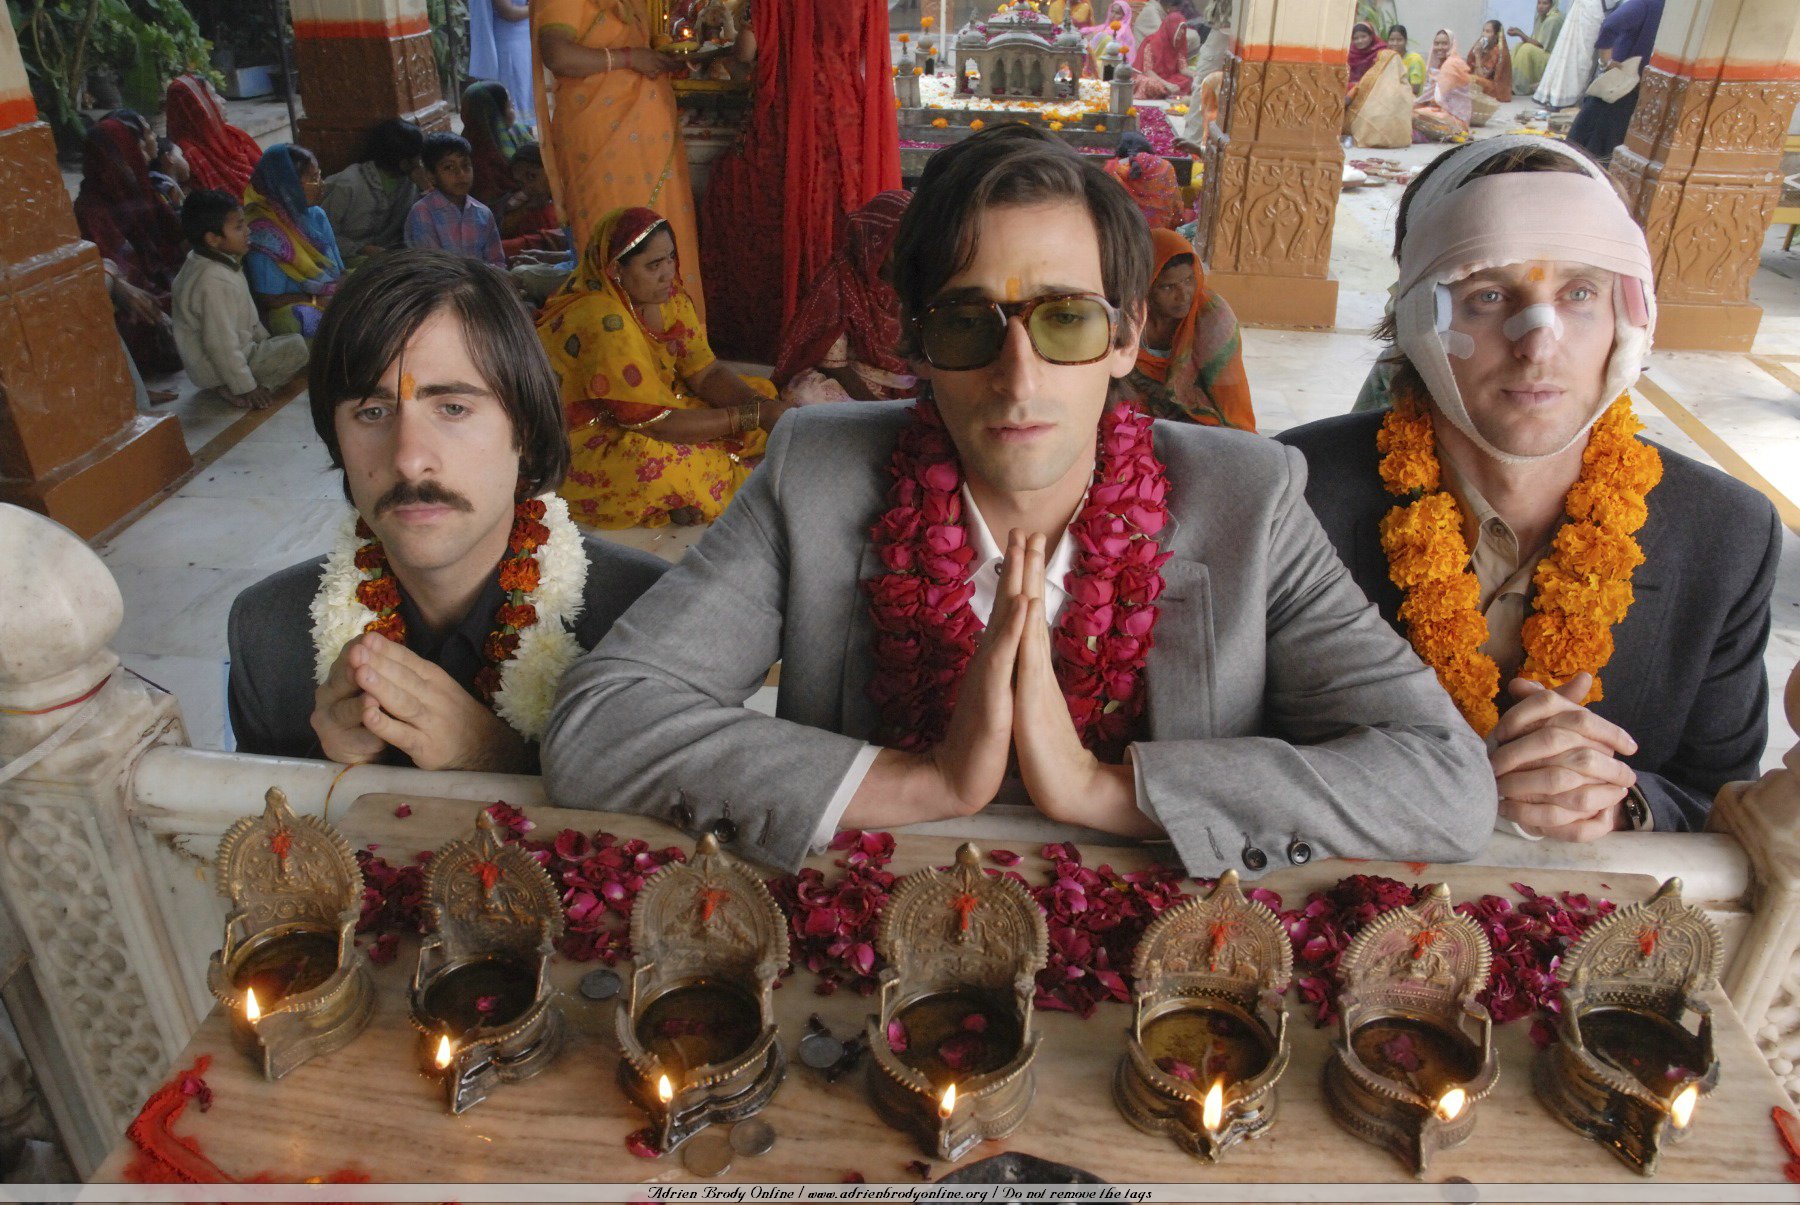 Set the tone: HORNE rides 'The Darjeeling Limited' for inspiration